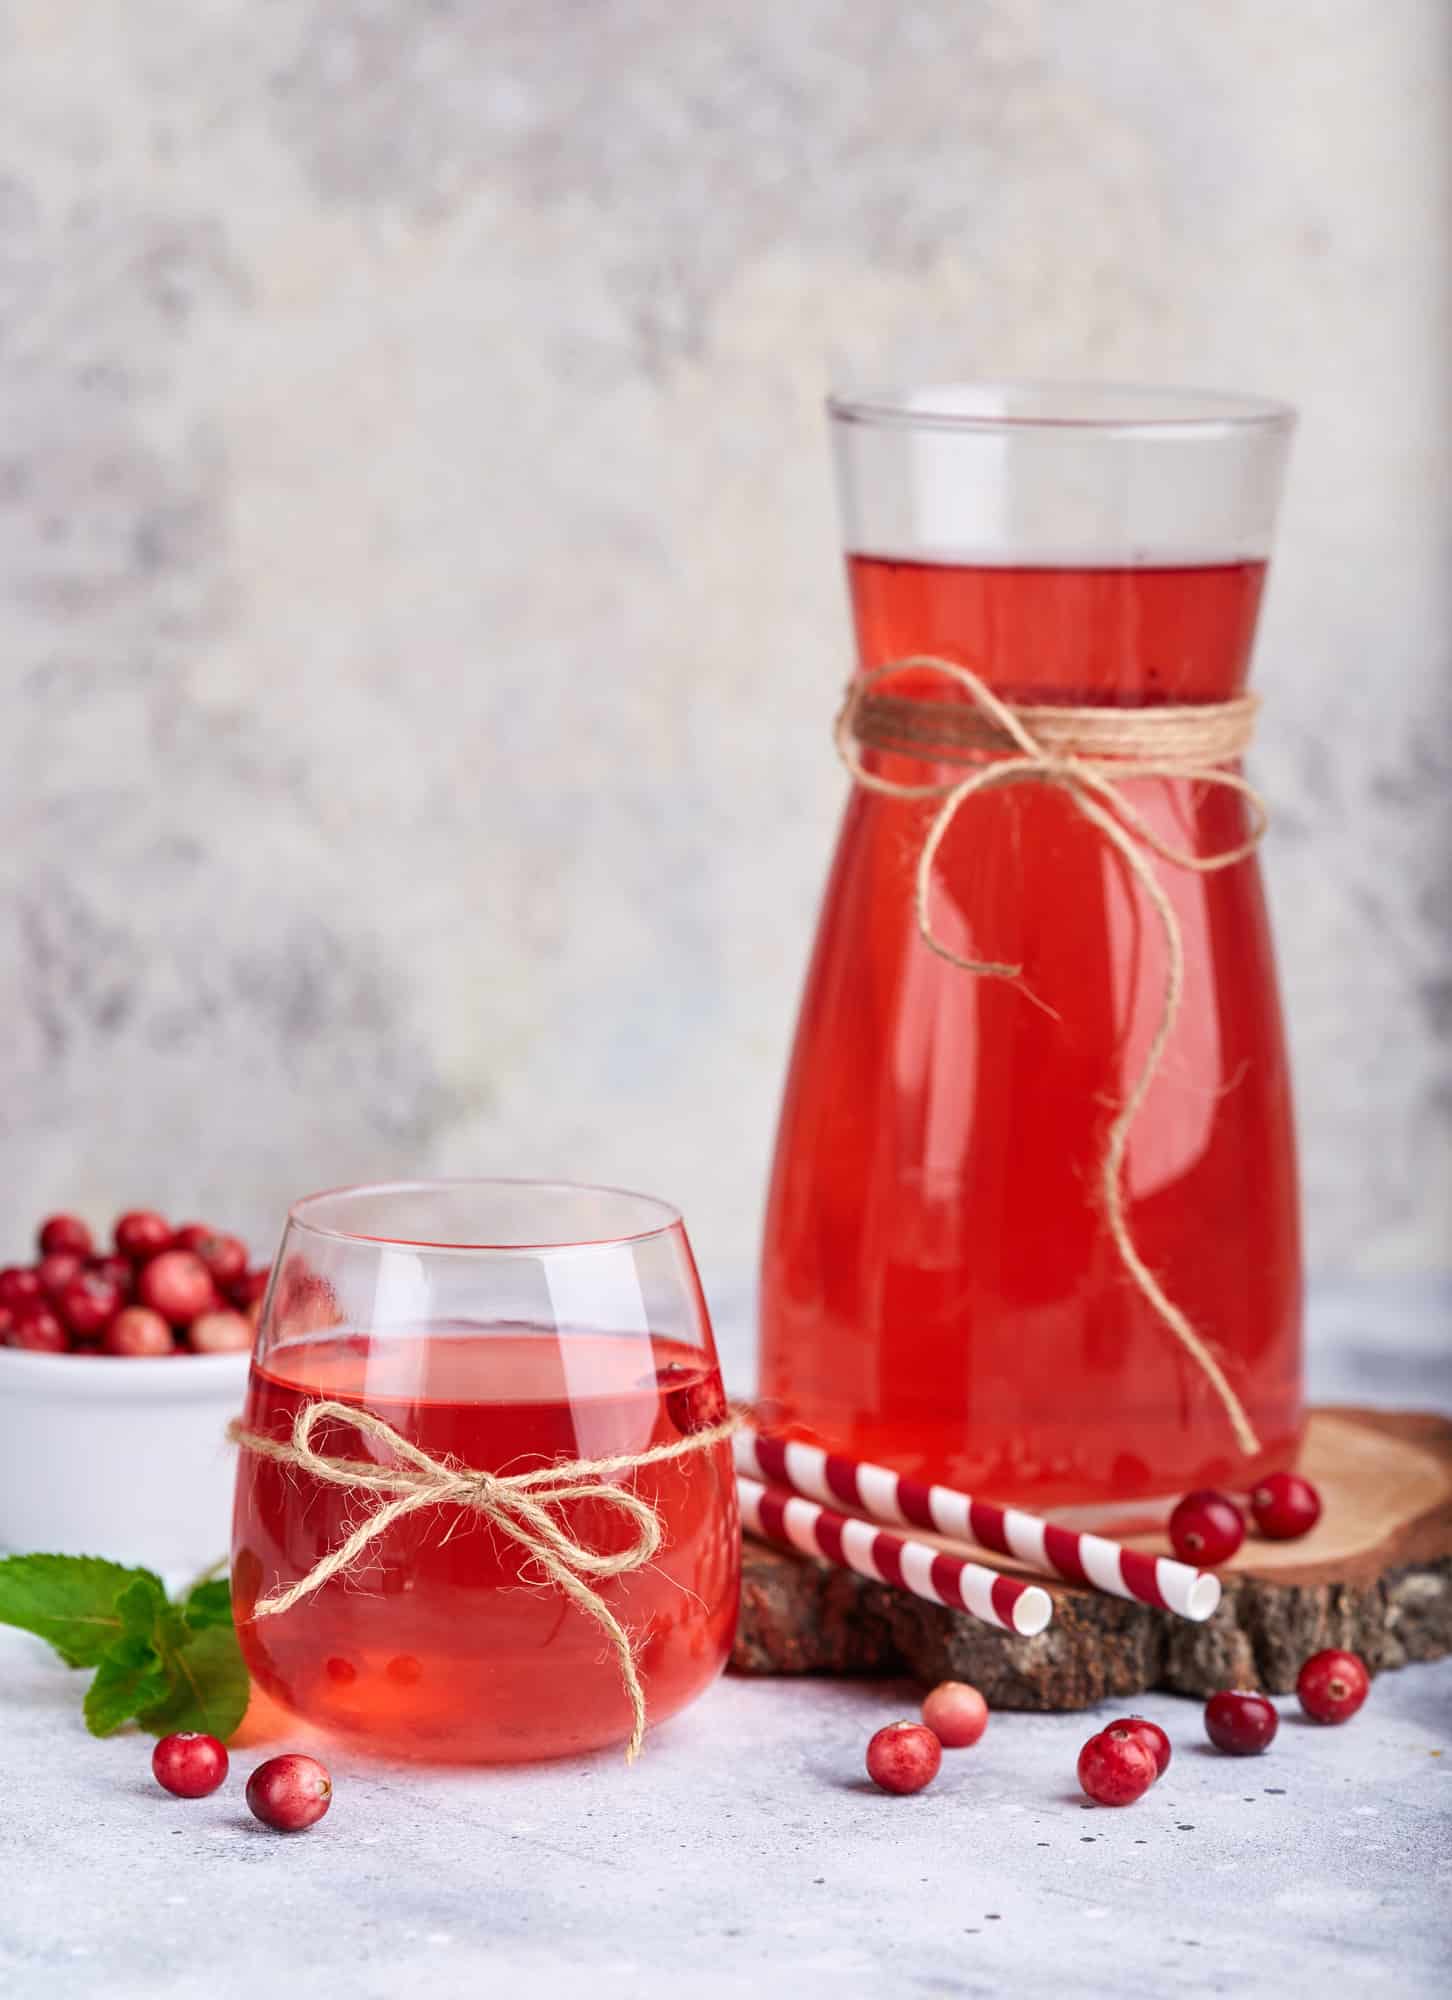 A glass and bottle of cranberry mors.